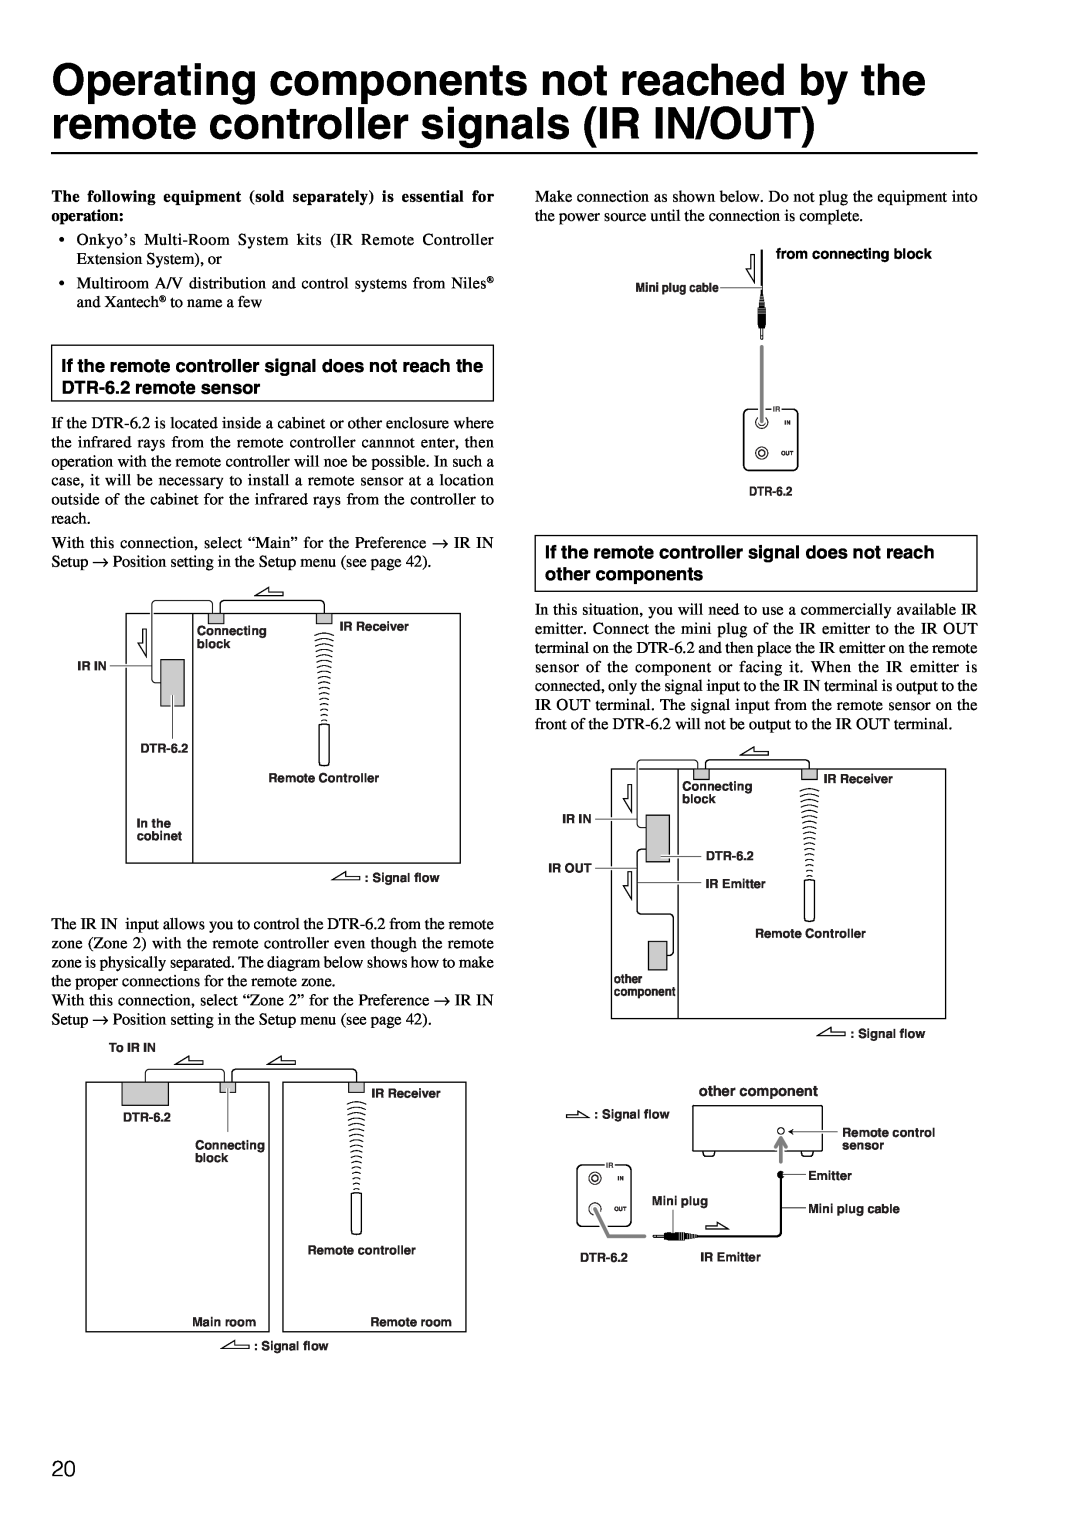 Integra DTR-6.2 instruction manual from connecting block, other component 